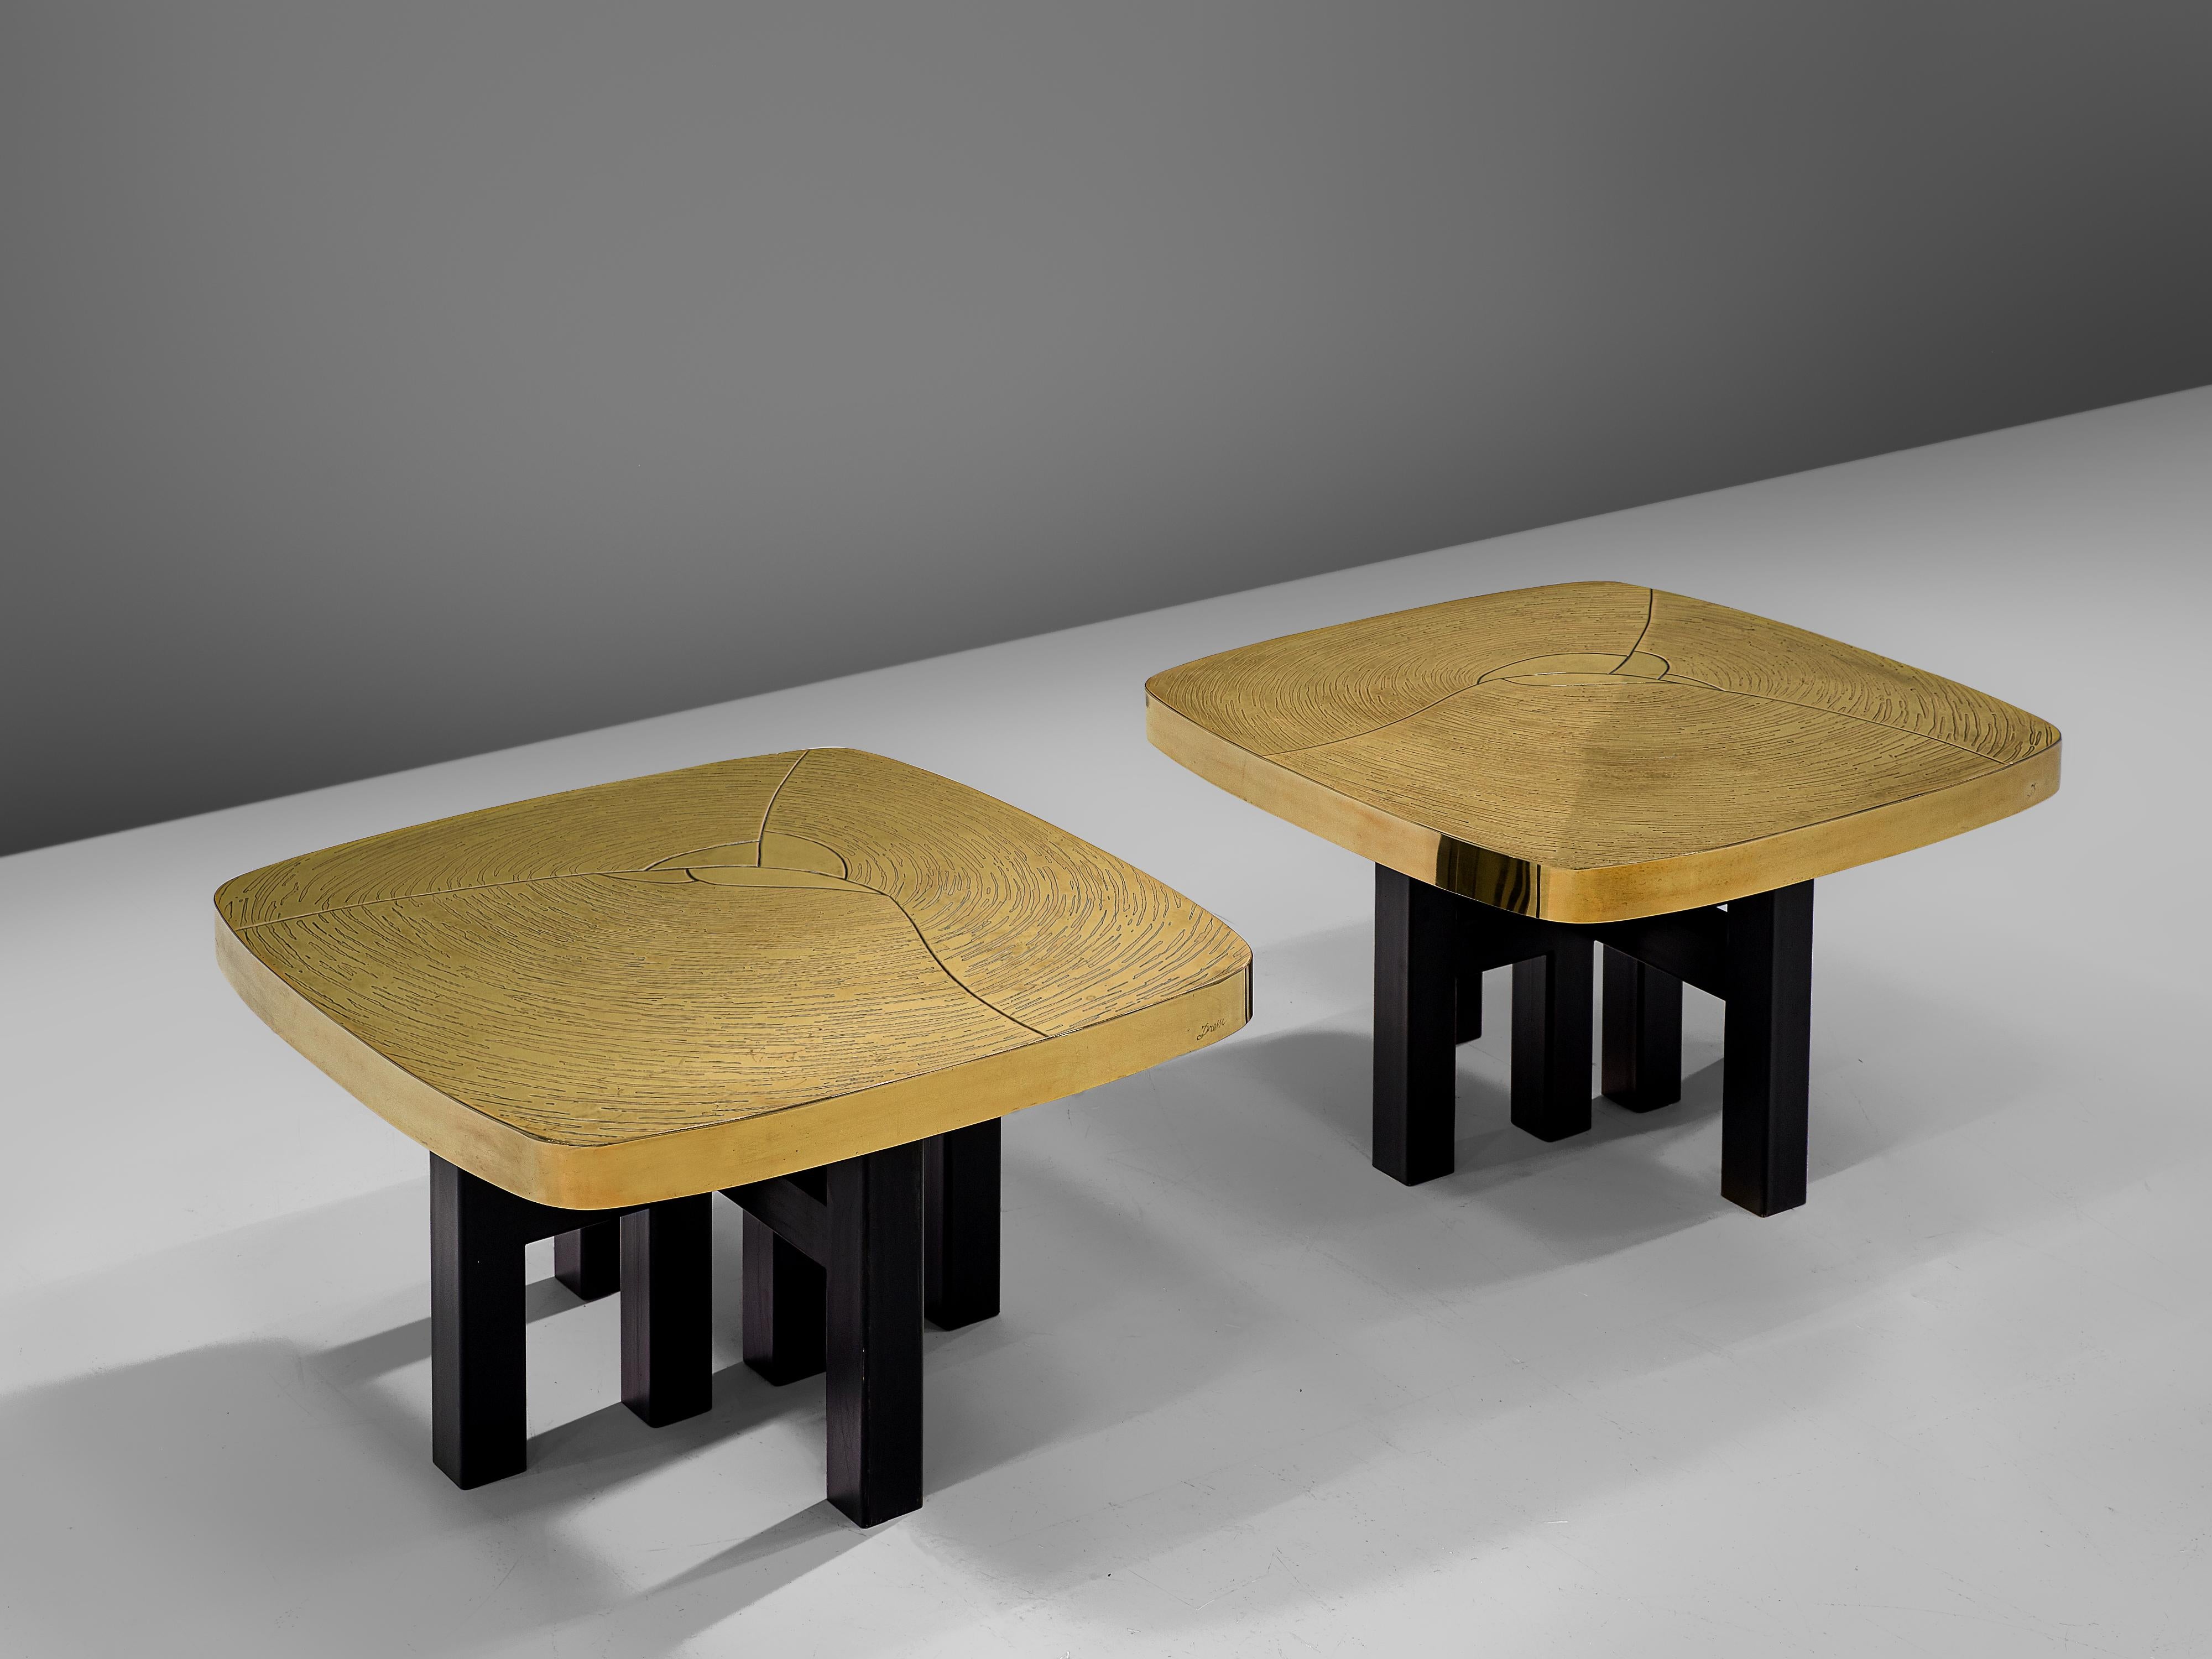 Jean Claude Dresse, pair of side tables, brass and steel, Belgium, 1970s

Elegant pair of coffee tables by the Belgian designer and artist Jean Claude Dresse. The tables feature table tops of brass with an etched organic pattern. The tabletop rests